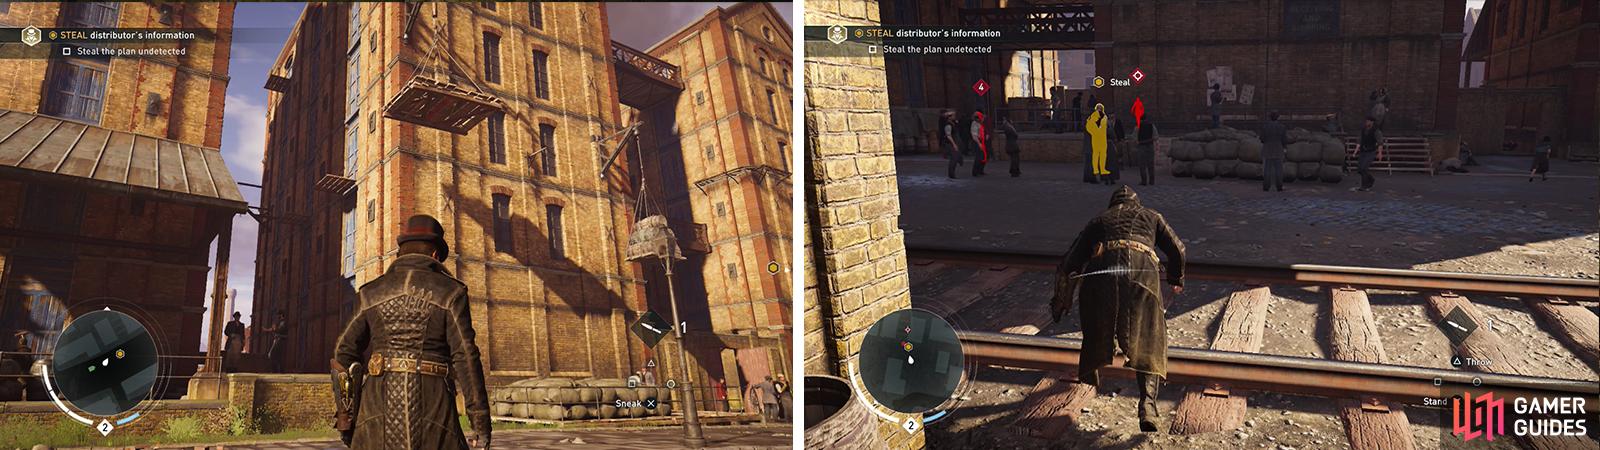 Run through the side alley (left). Sneak up and pickpocket the plans from the target (right).